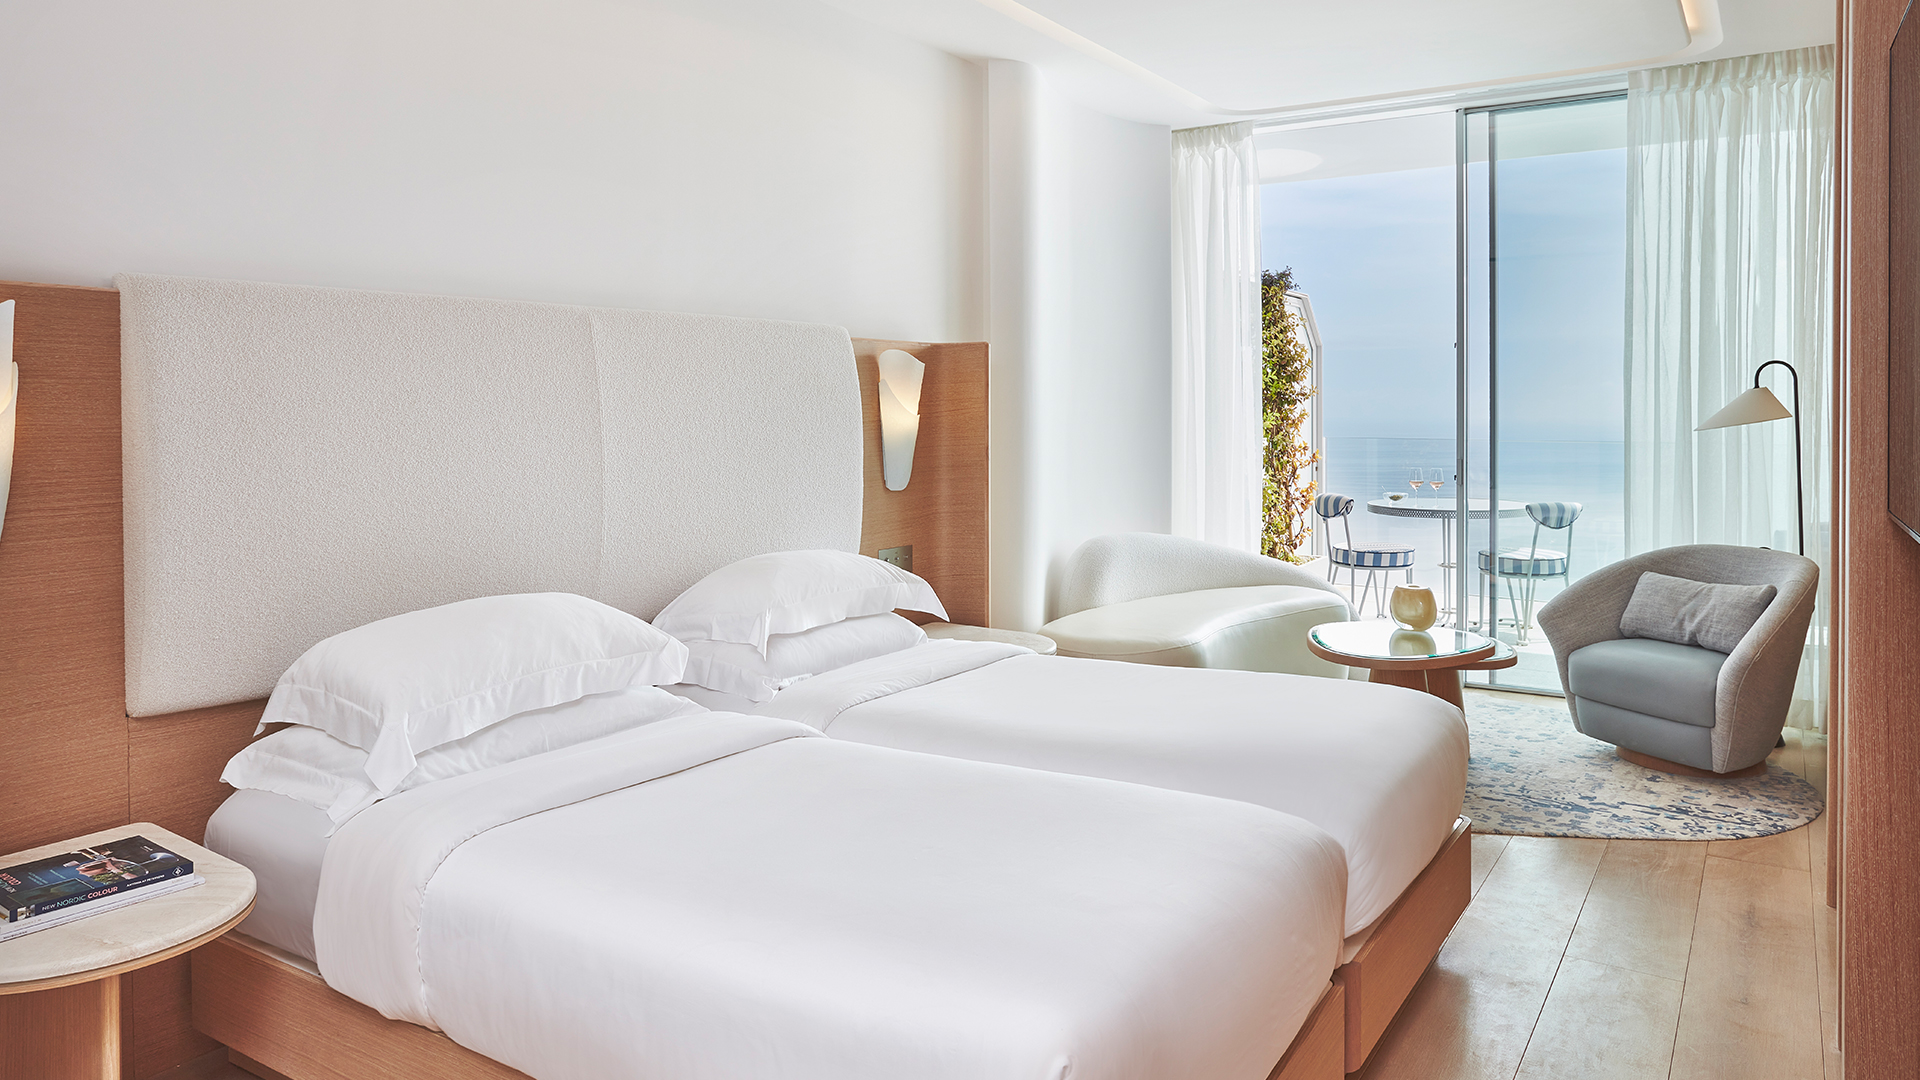 Two singe beds side by side in the Corniche Room with a lounge area and terrace in the background.